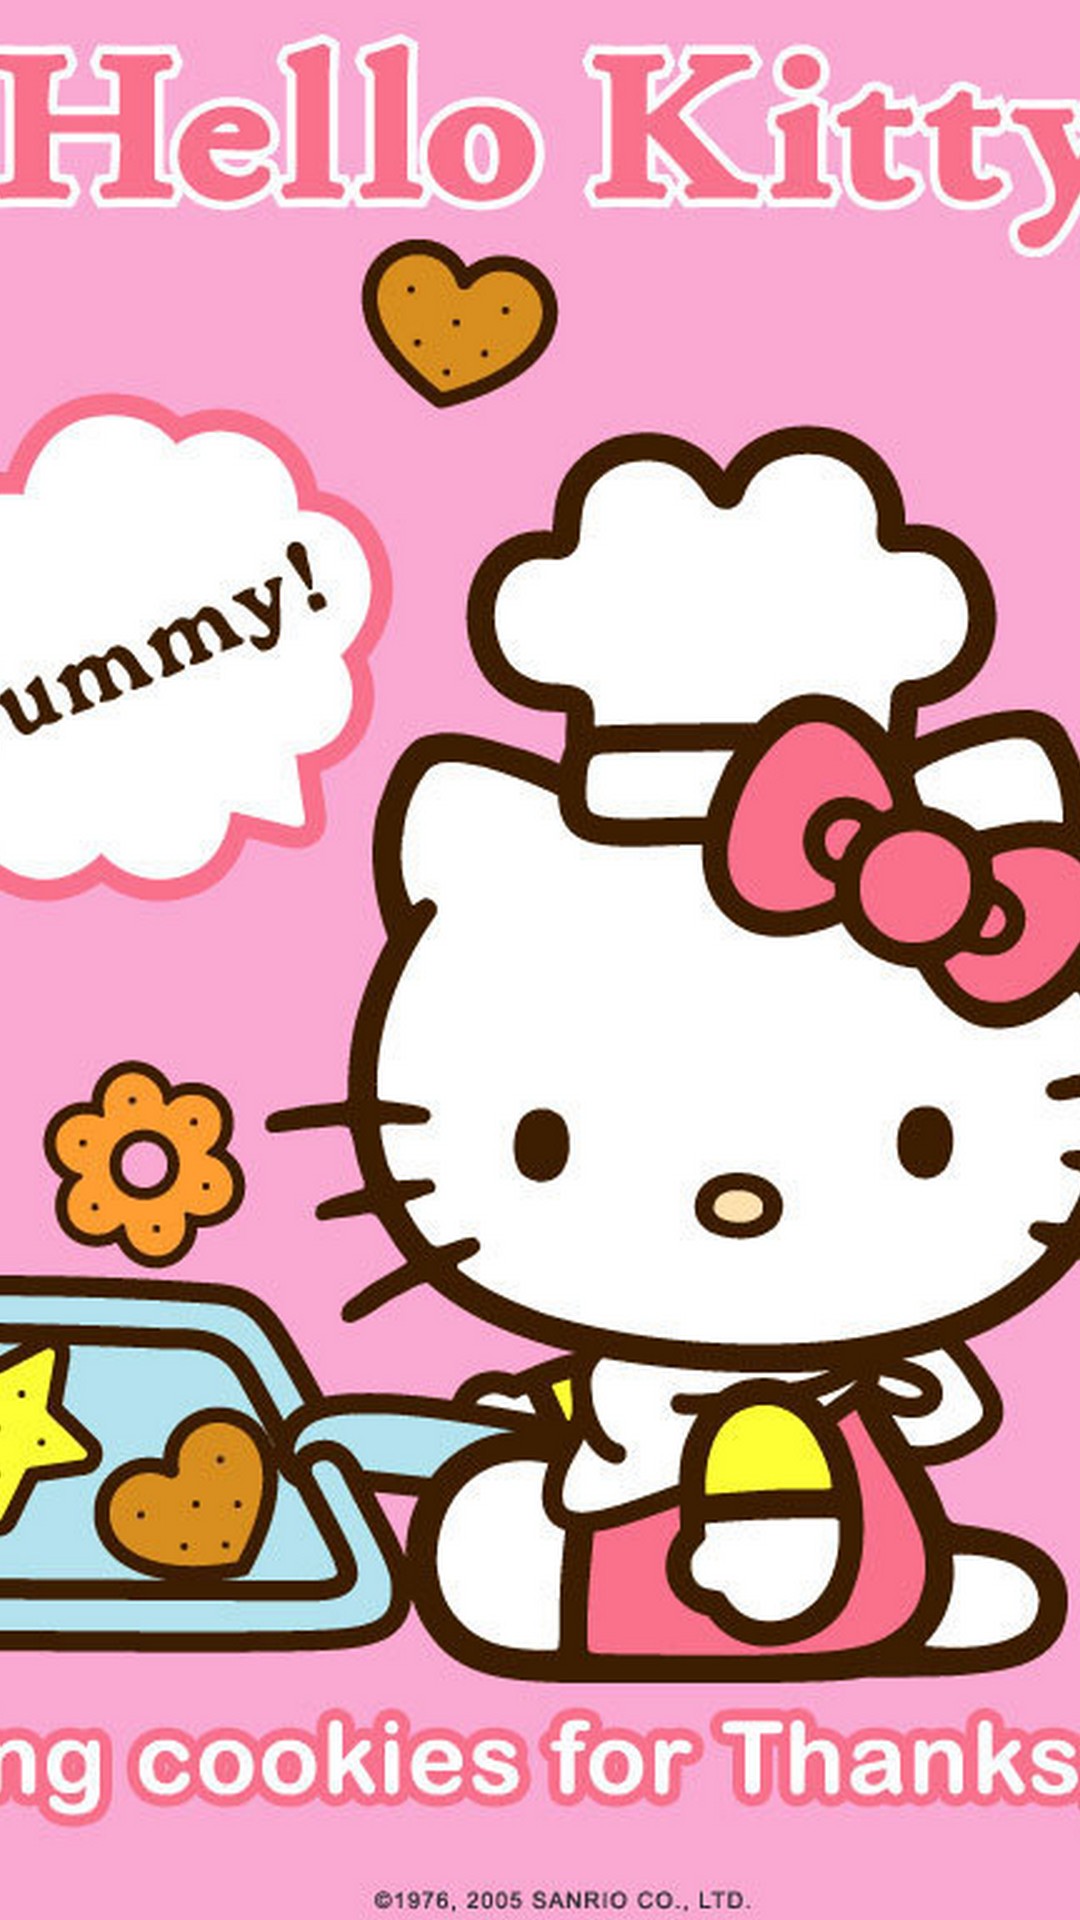 iPhone Wallpaper Hello Kitty Pictures with image resolution 1080x1920 pixel. You can make this wallpaper for your iPhone 5, 6, 7, 8, X backgrounds, Mobile Screensaver, or iPad Lock Screen